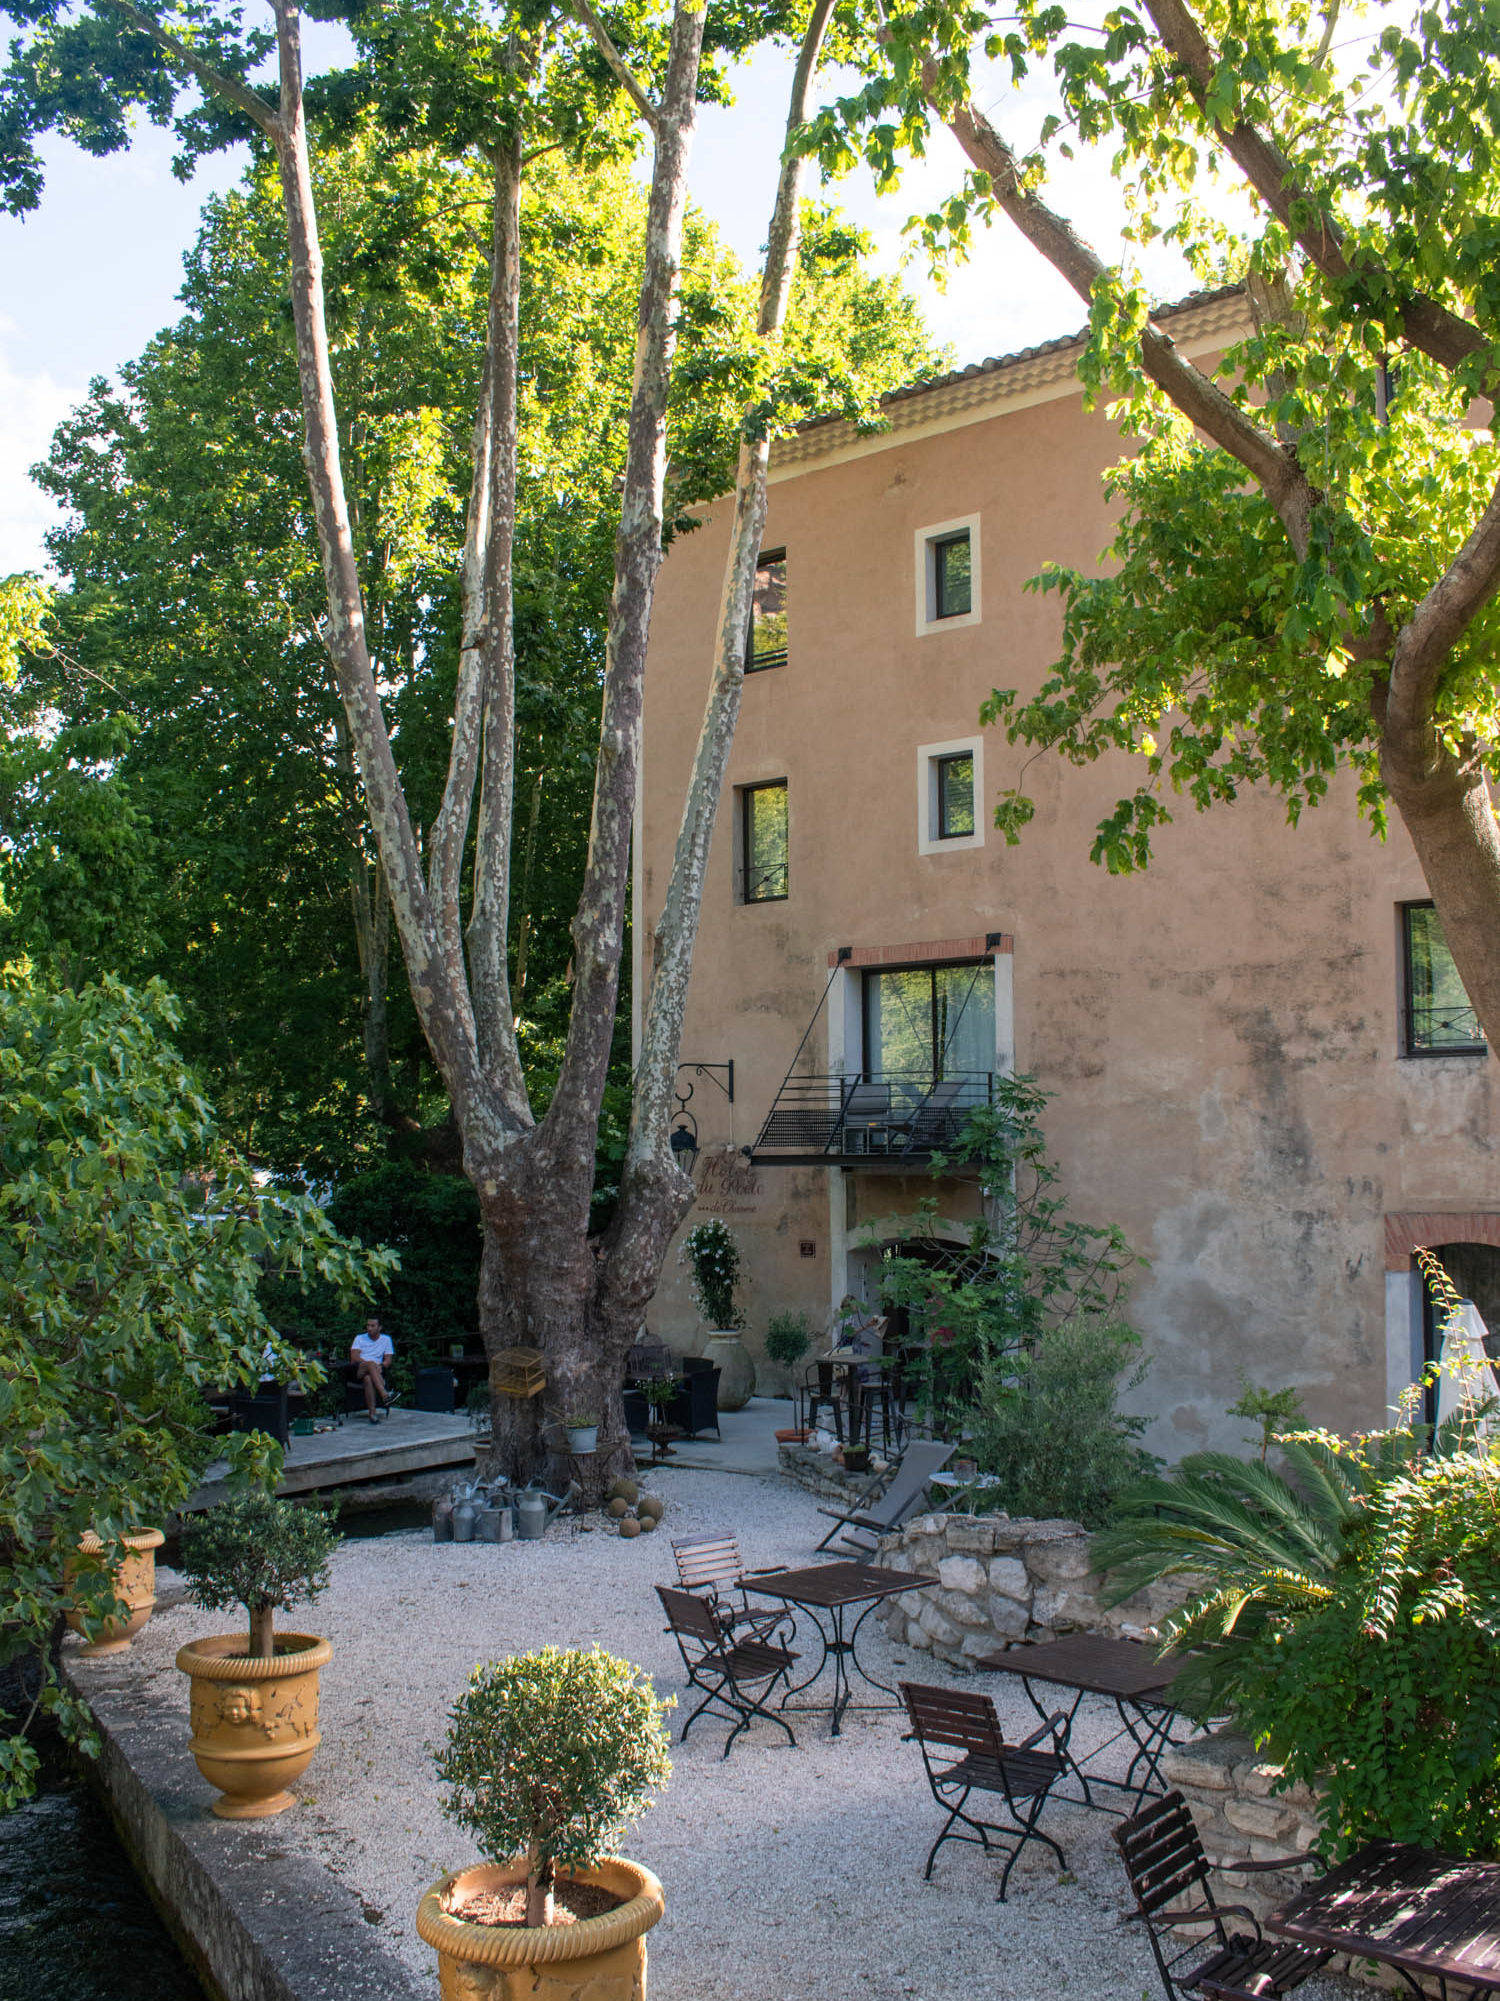 Where to stay Fontaine de Vaucluse